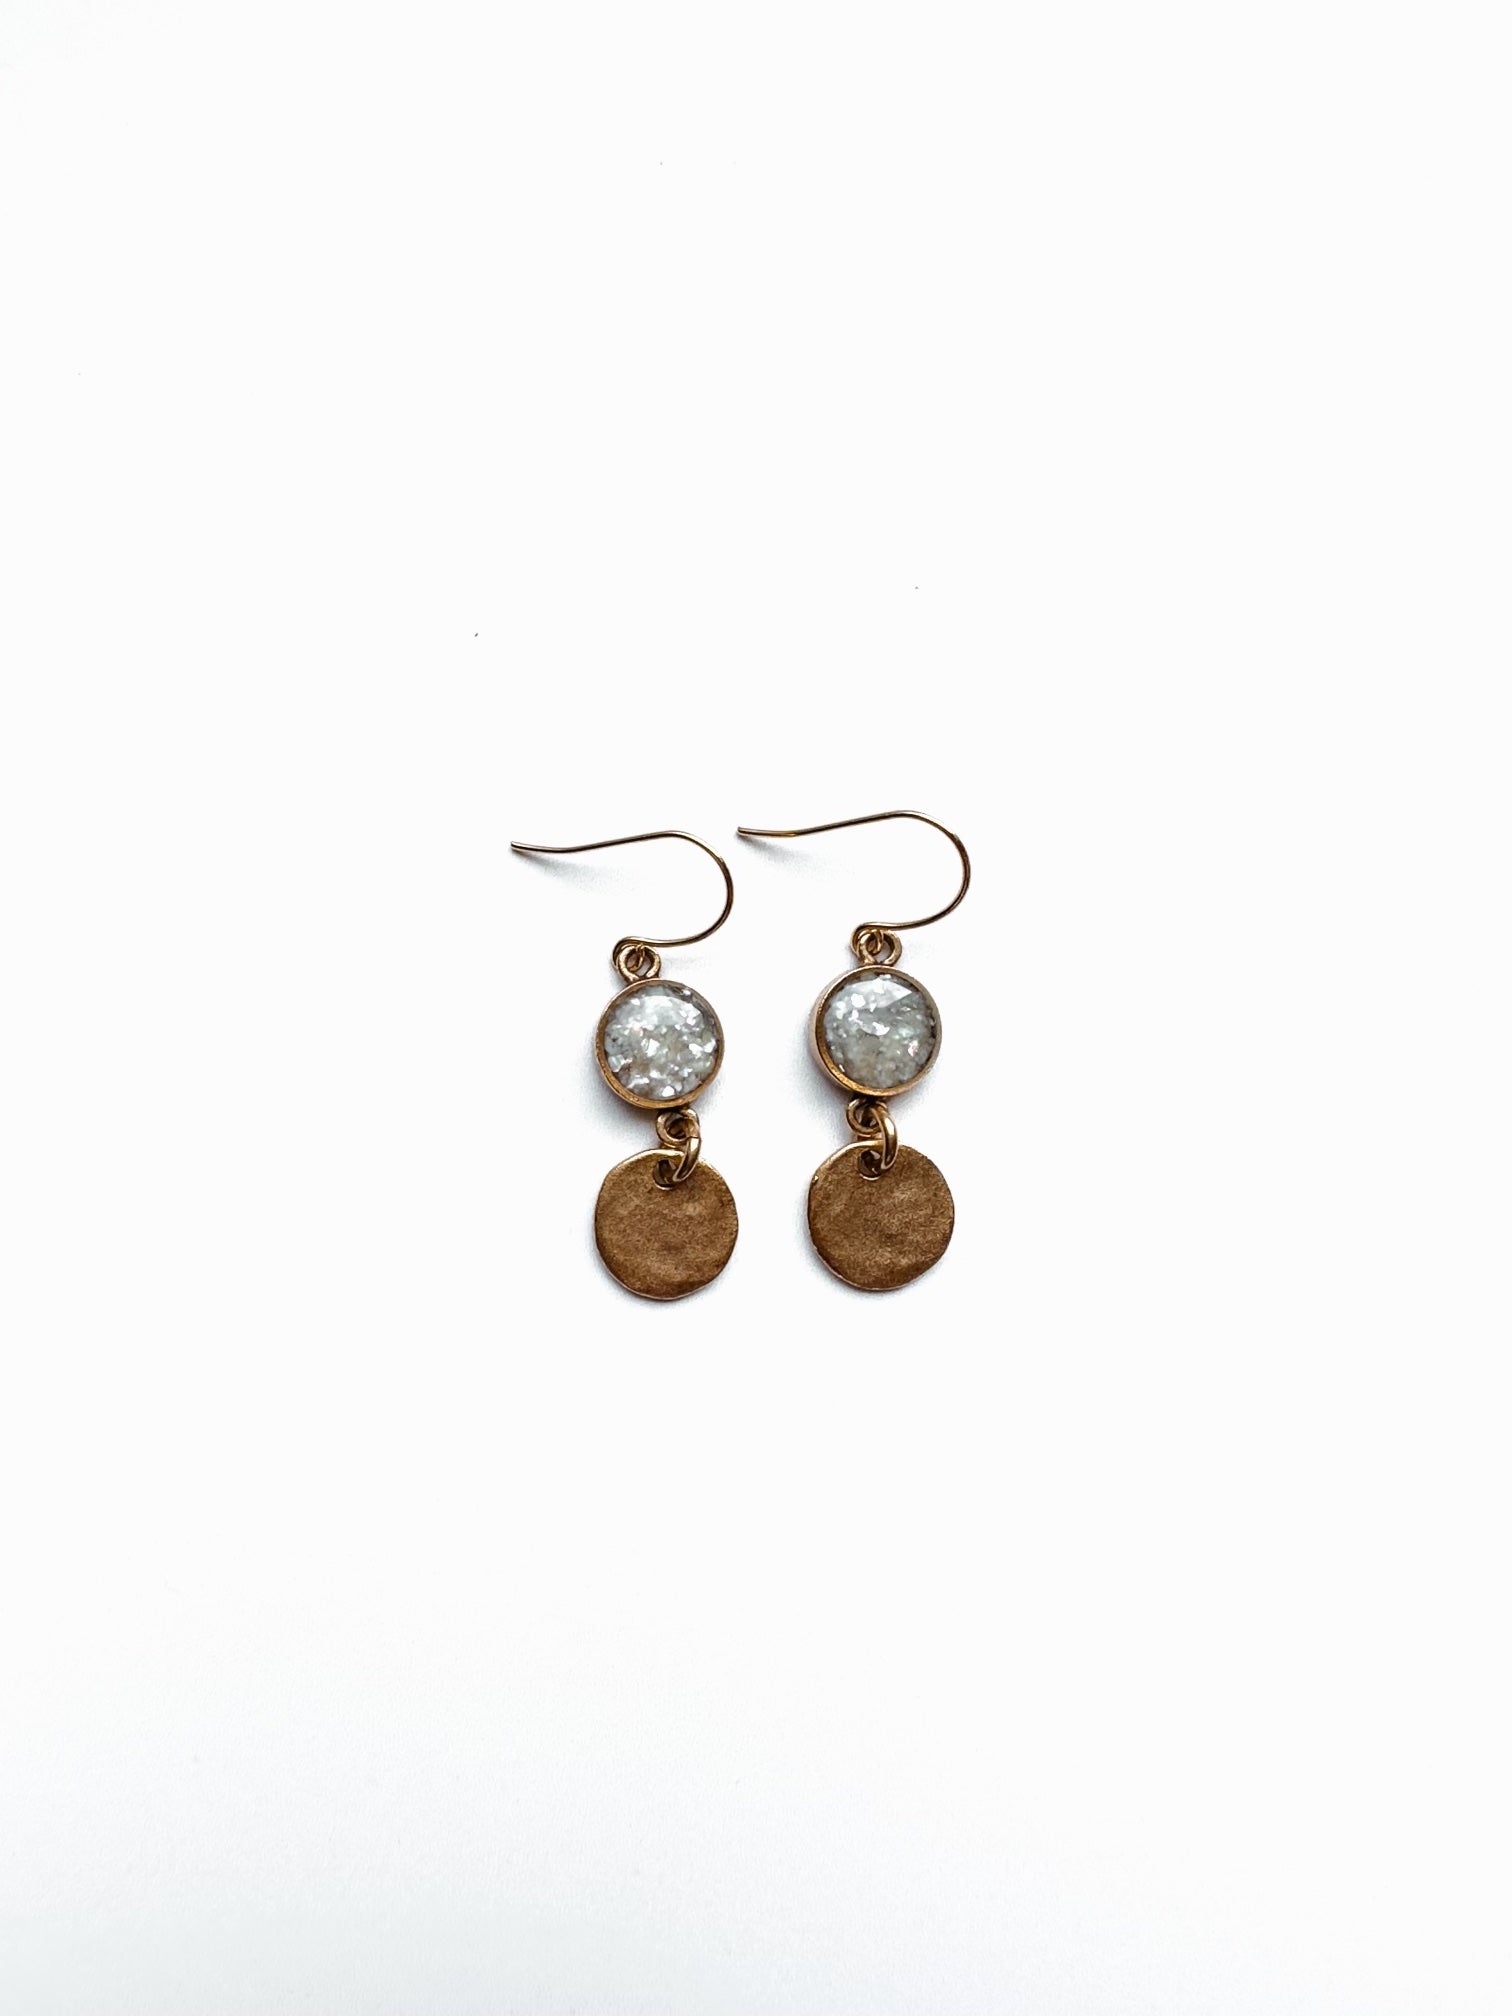 The Cabo-Crushed Gem Disc Earrings